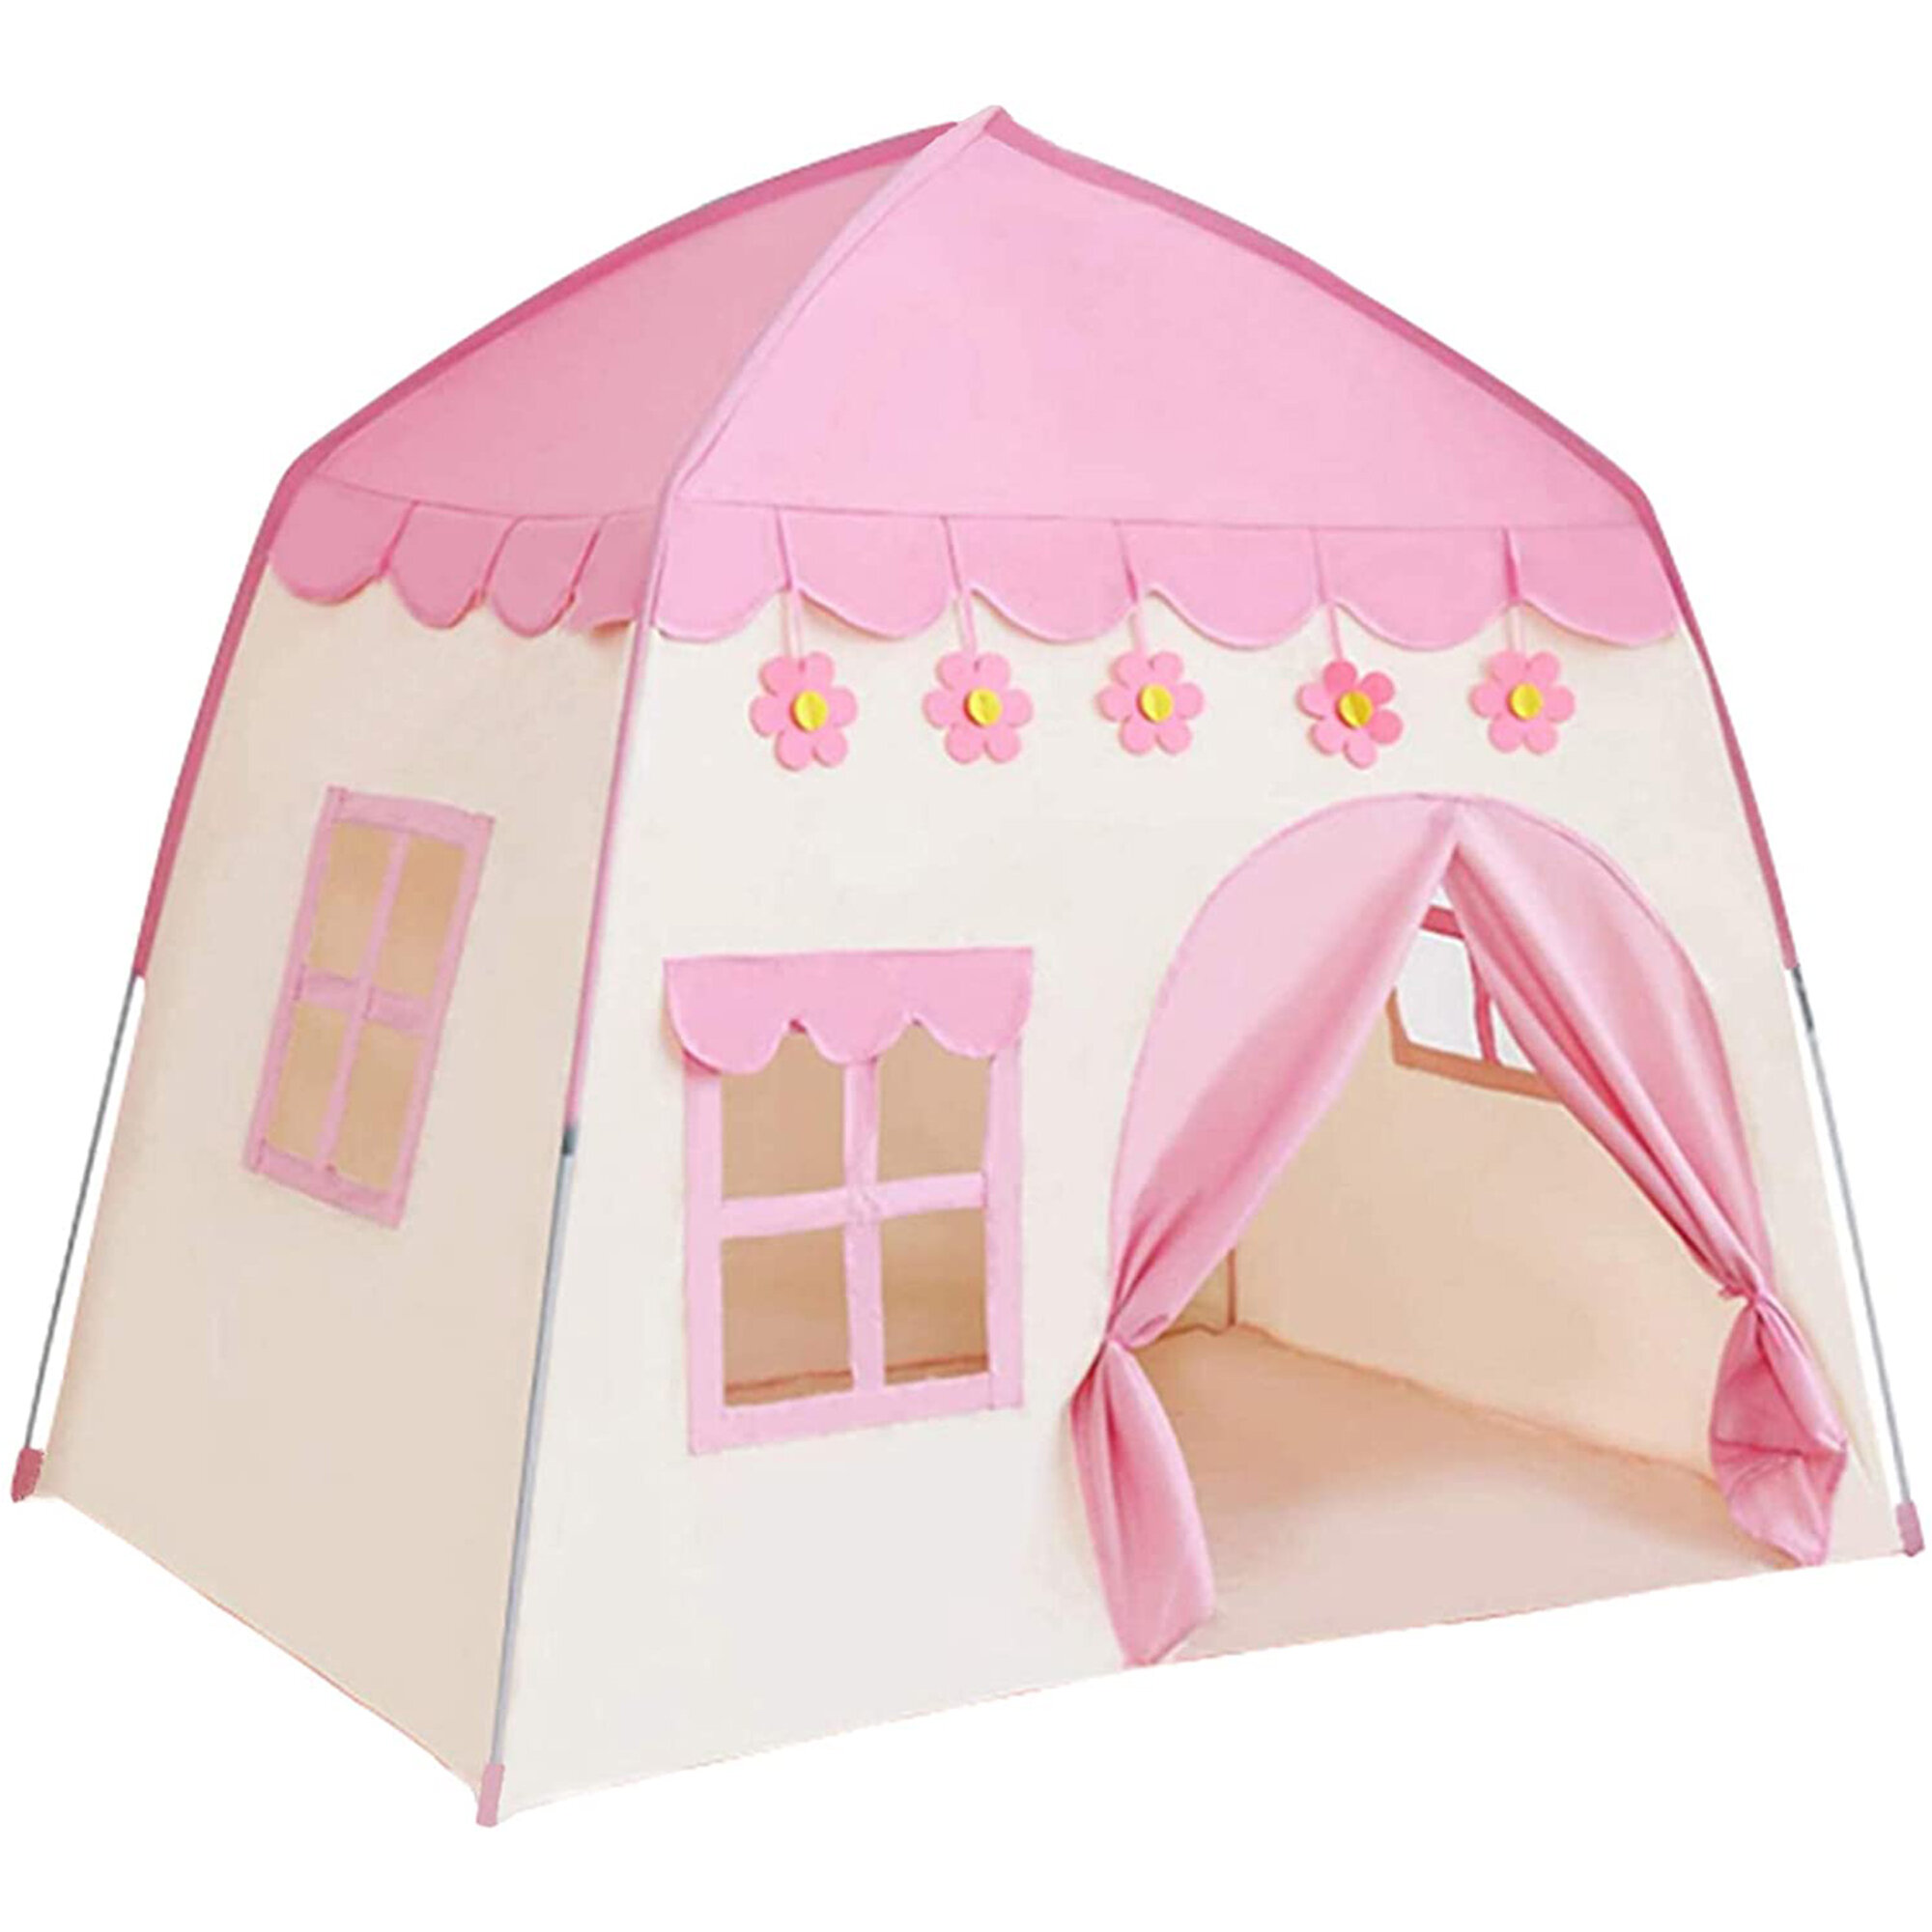 Kids Play Tent Playhouse Princess Castle Baby Children House Toy For Girl 